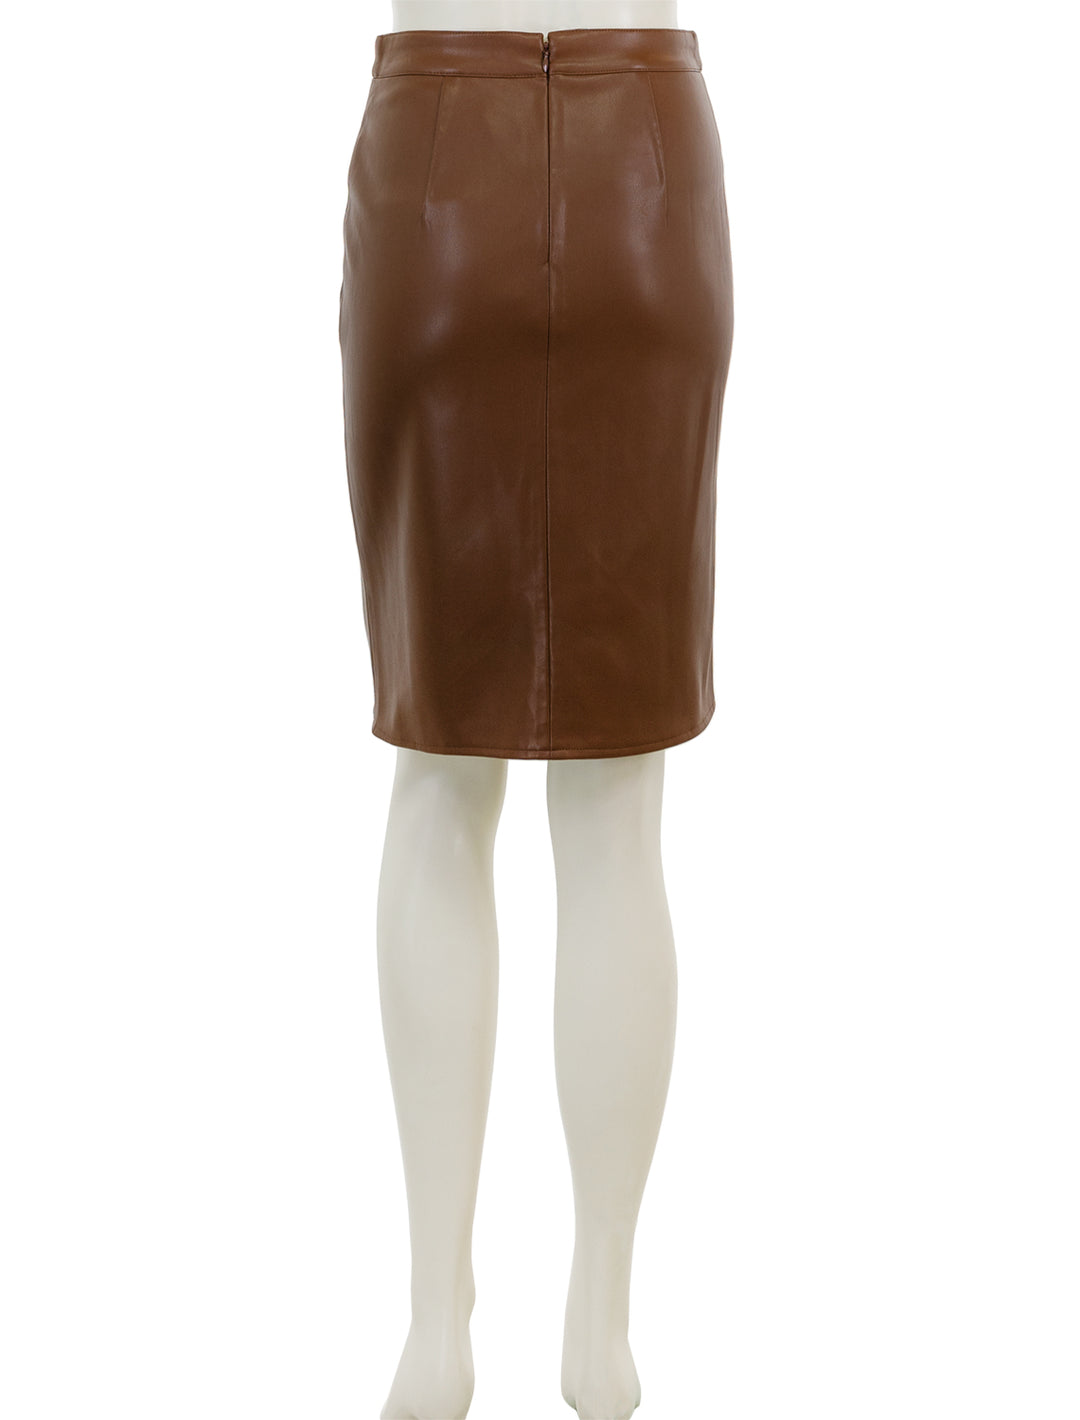 Back view of L'agence's amira pencil skirt in smoky quartz.